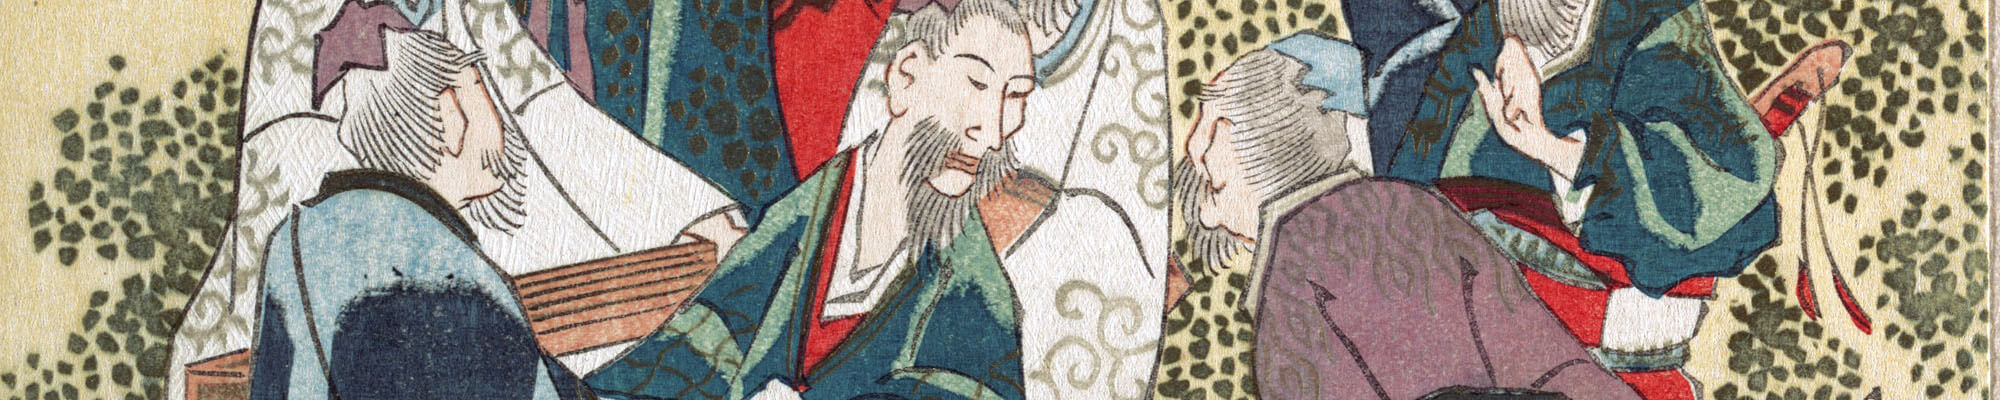 Chinese painting of Confucius